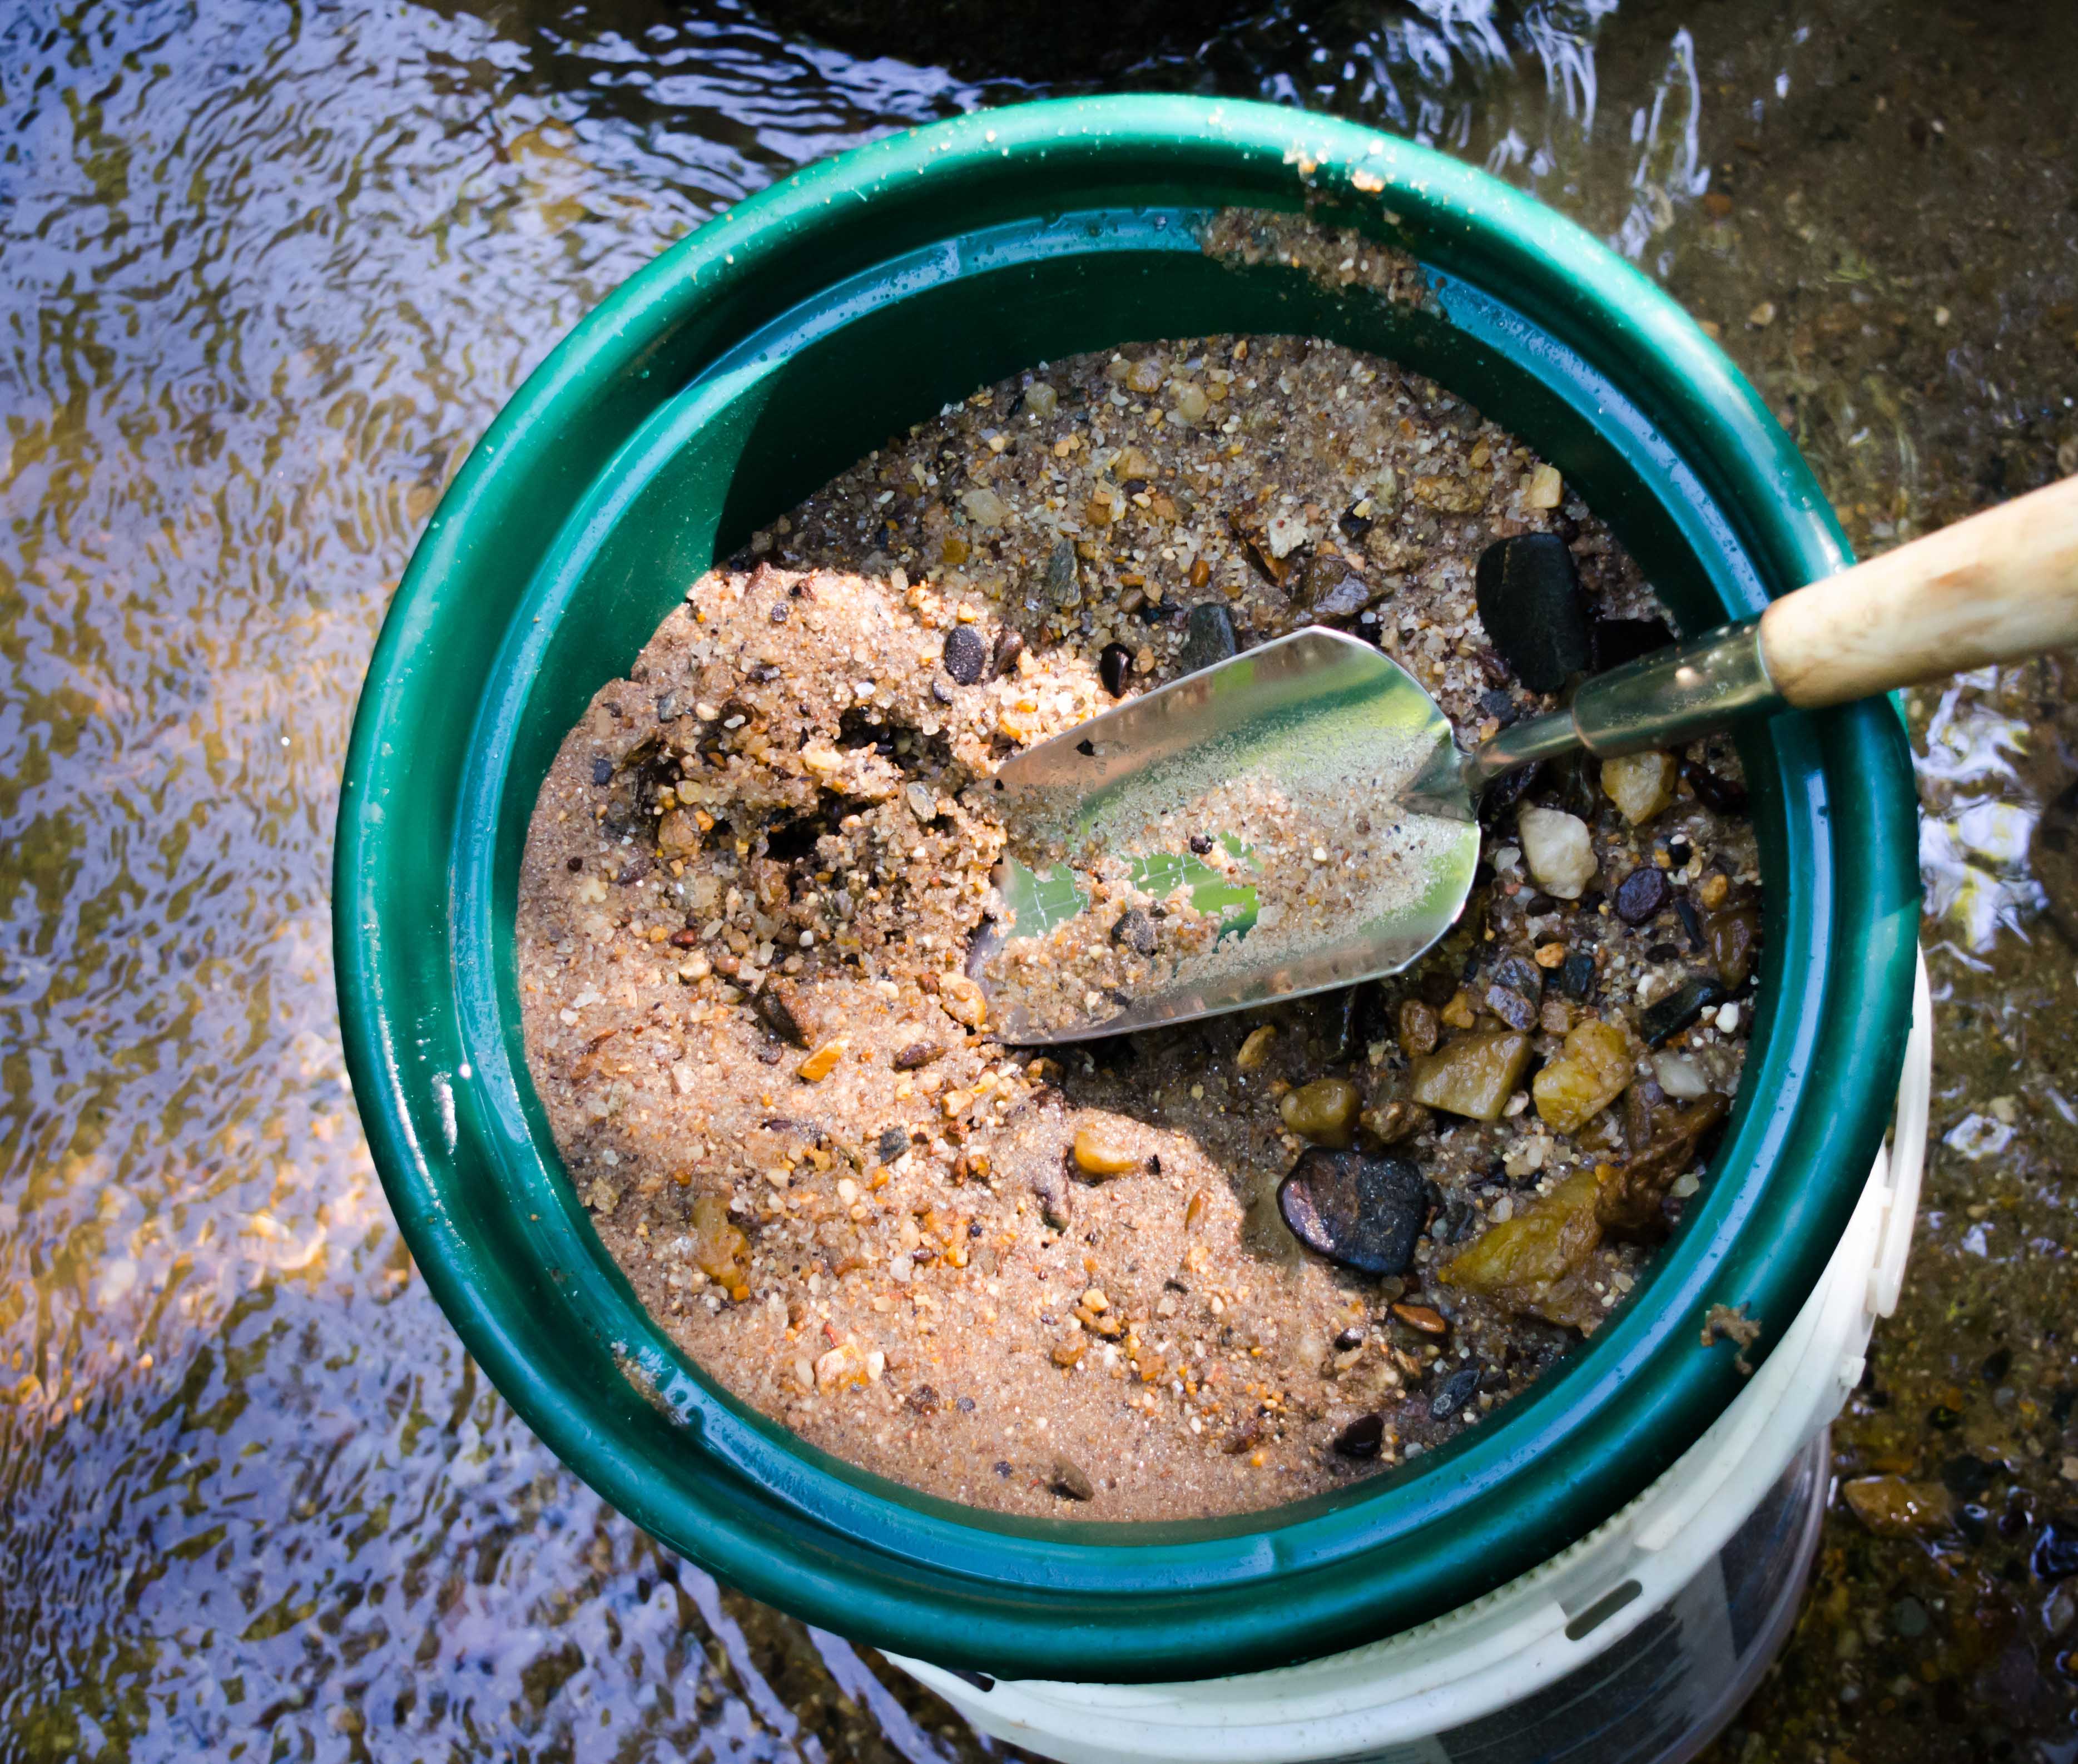 Gold Prospecting in Pennsylvania - Panning for Gold. — Steemit